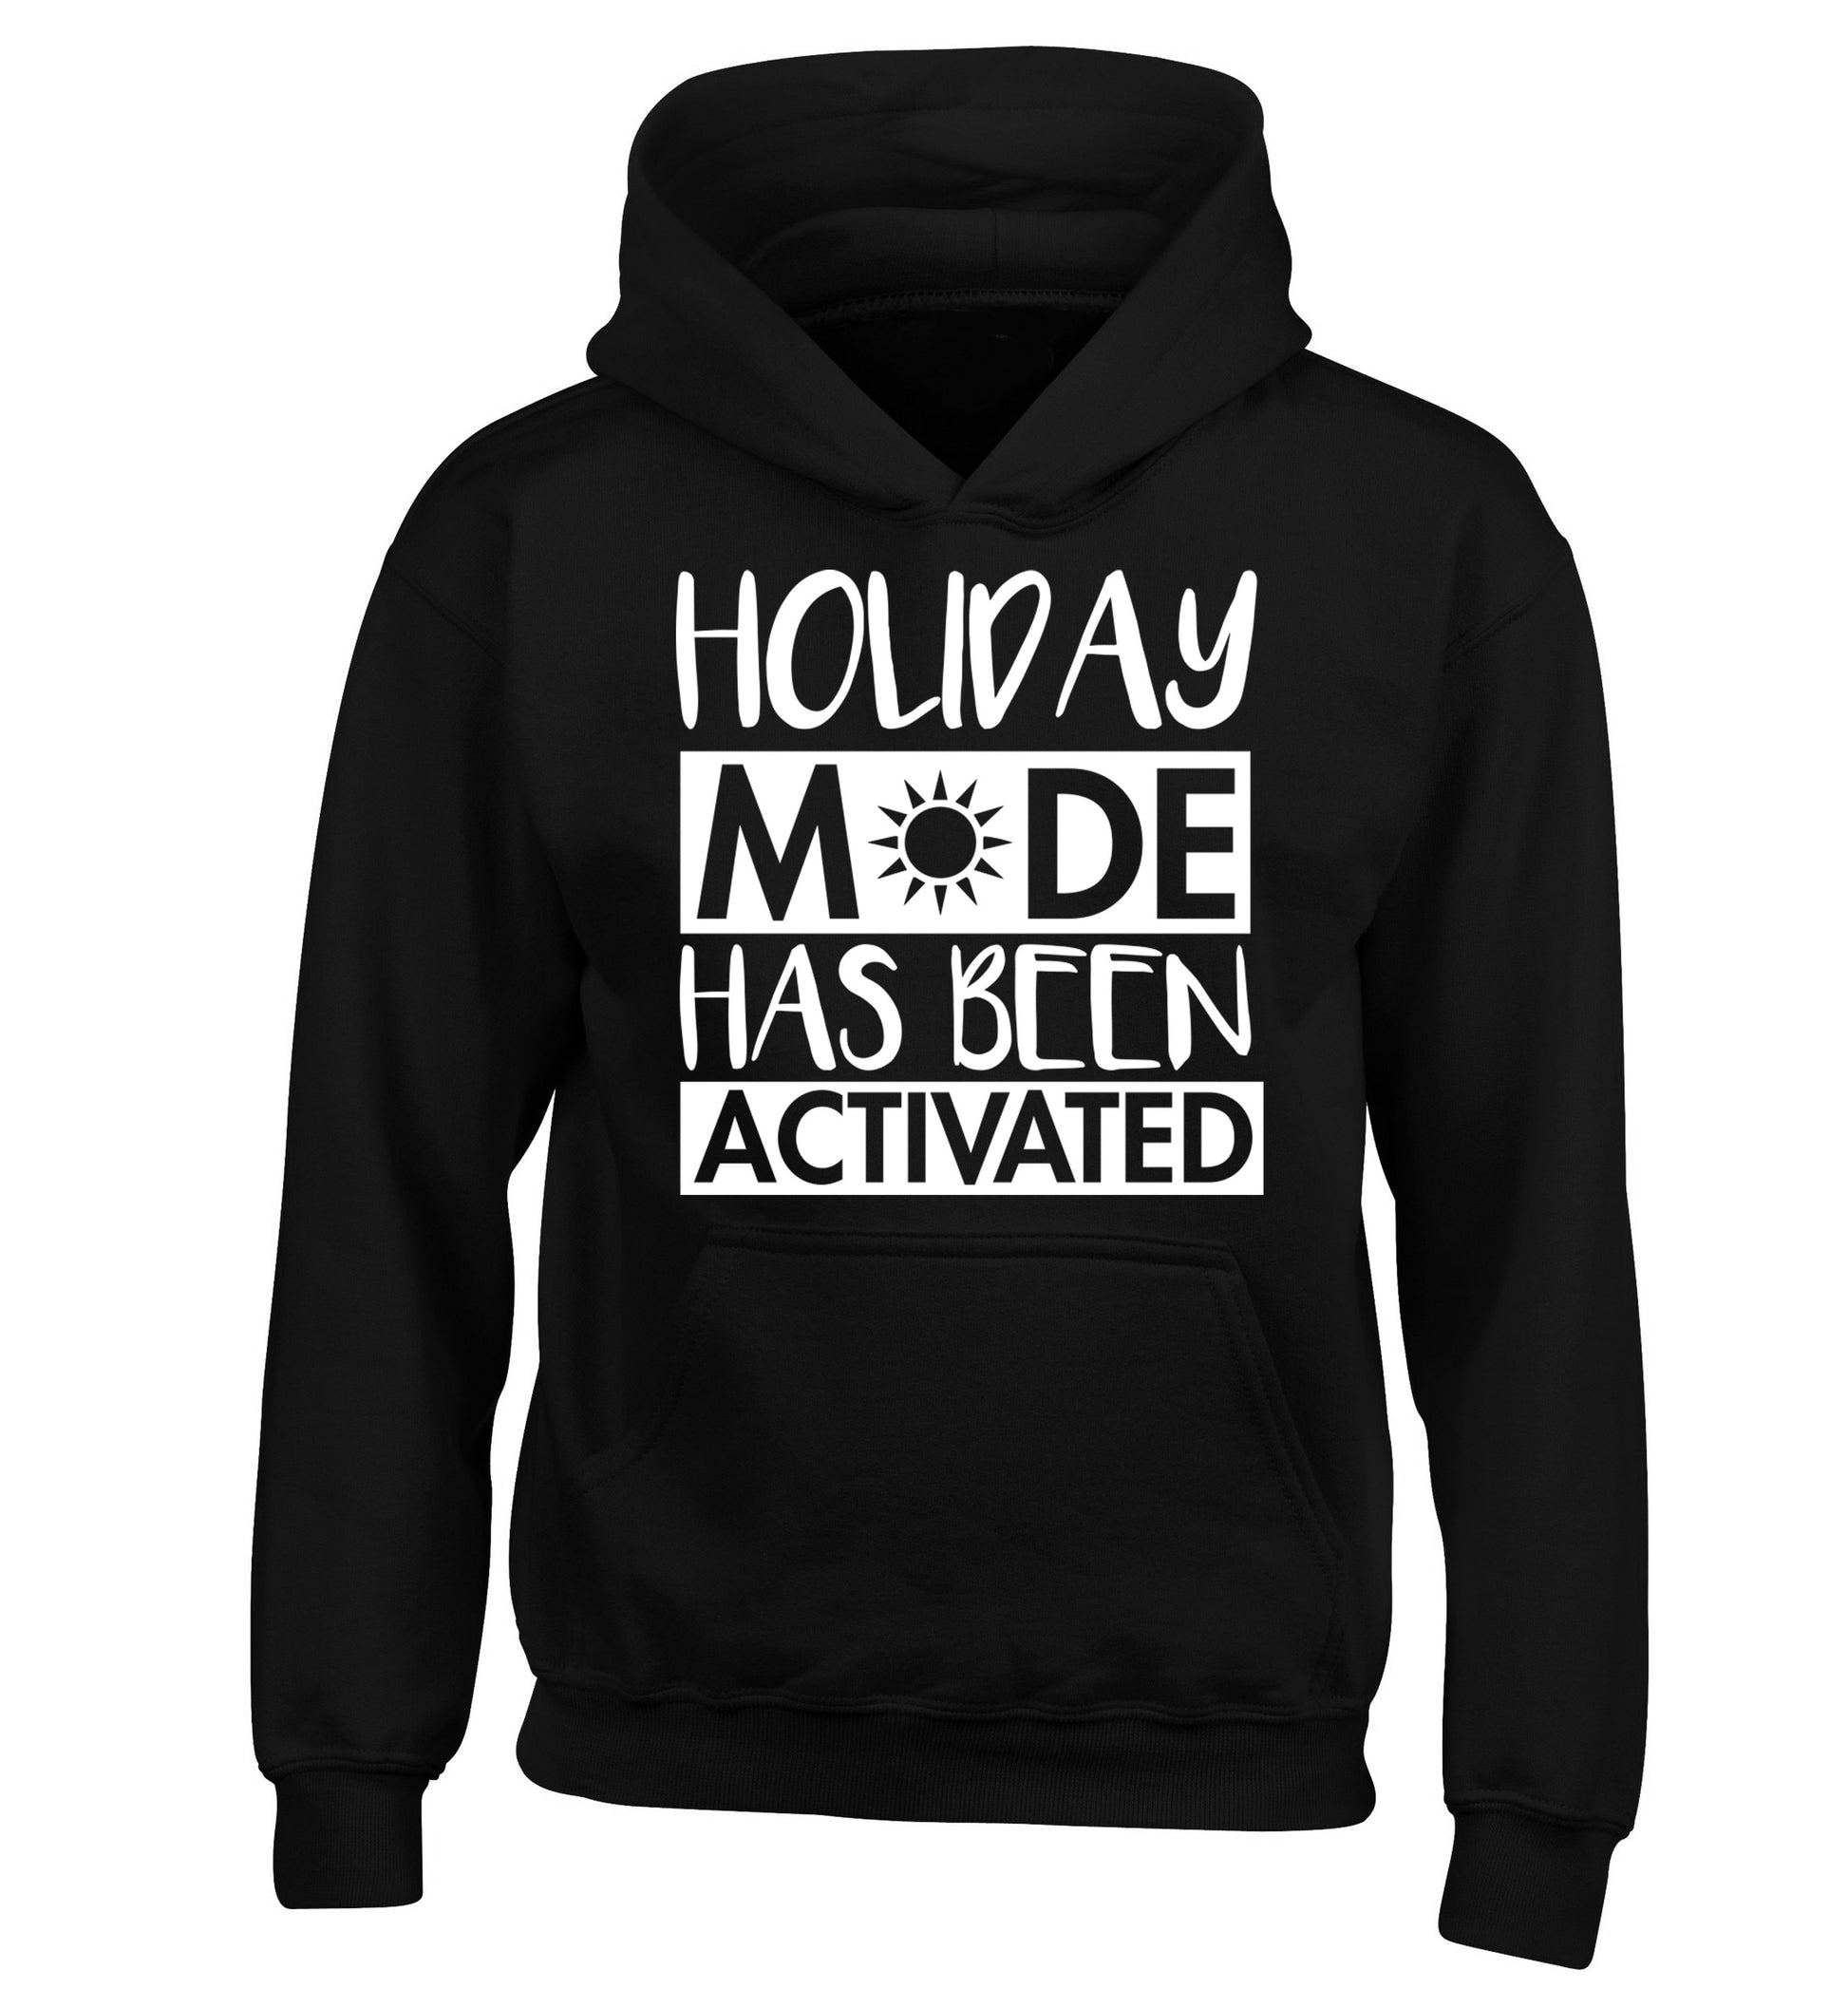 Holiday mode has been activated children's black hoodie 12-14 Years